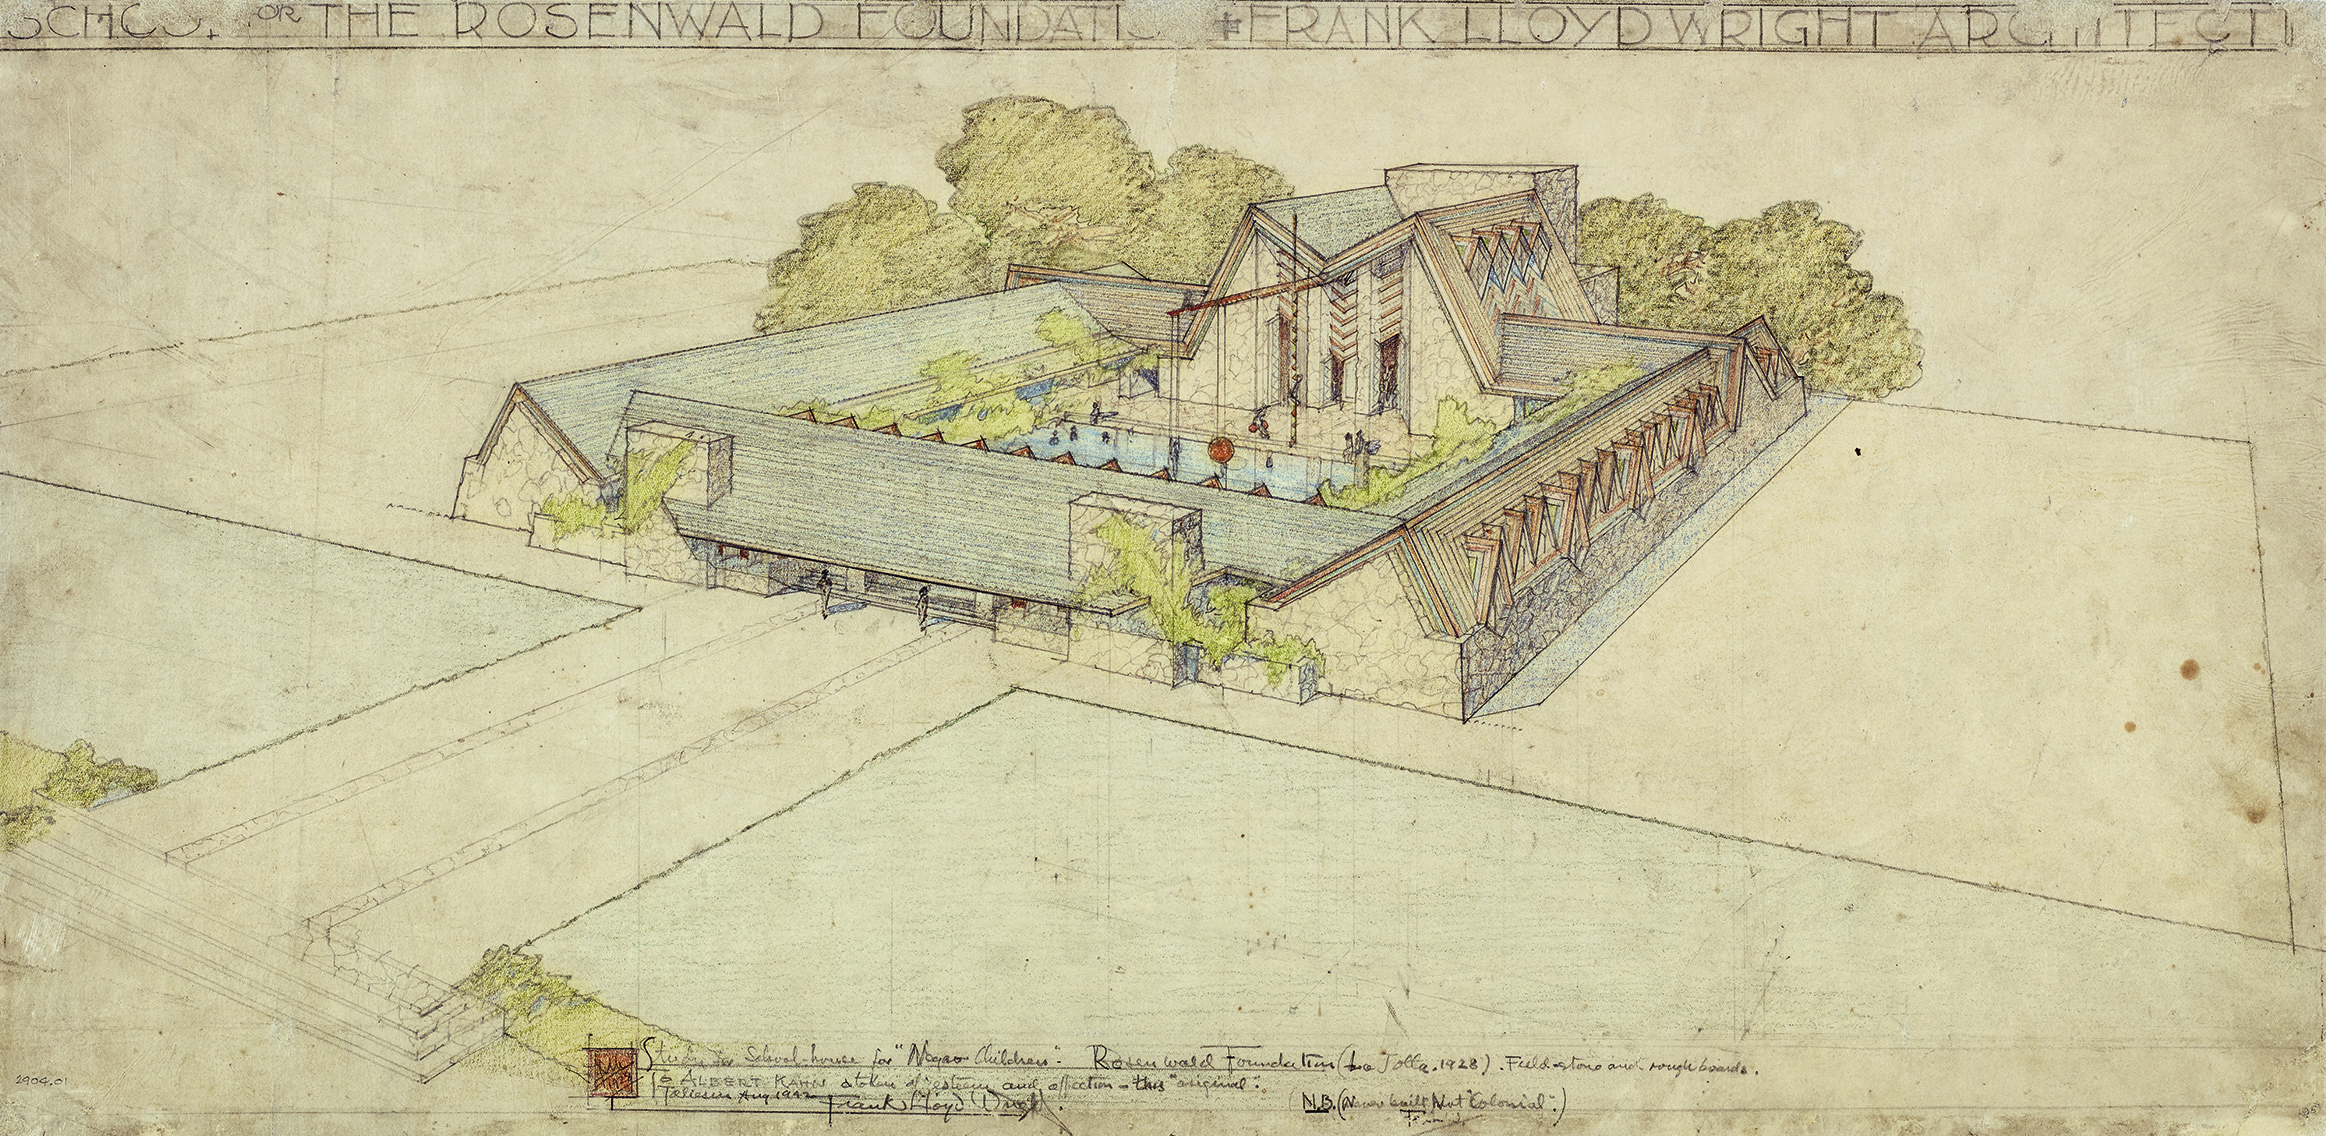 Frank Lloyd Wright Designs an Urban Utopia See His HandDrawn Sketches of  Broadacre City 1932  Open Culture